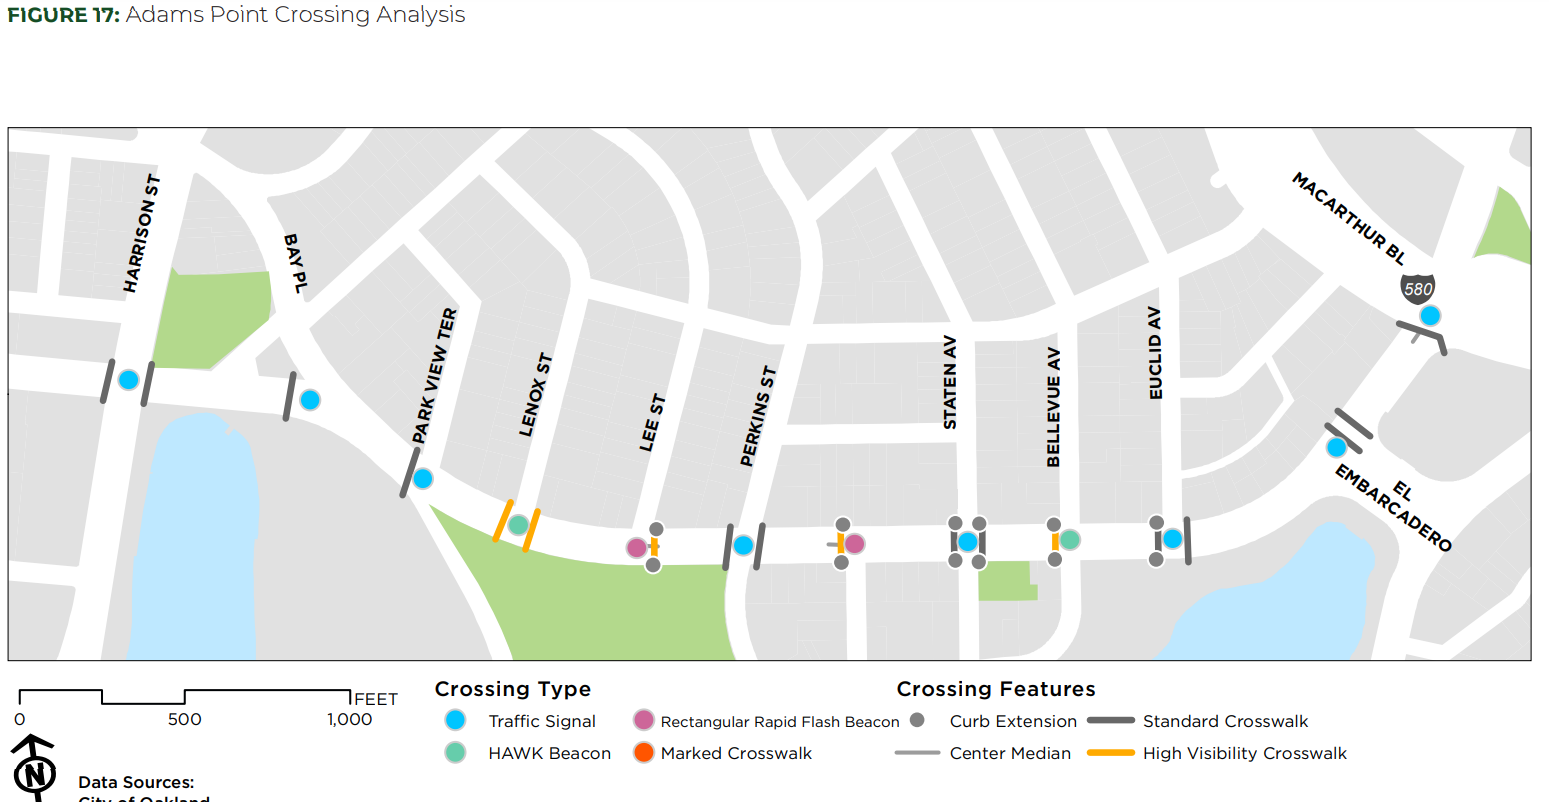 Adams Point Crossing Analysis in OakDOT's Grand Ave Mobility Plan